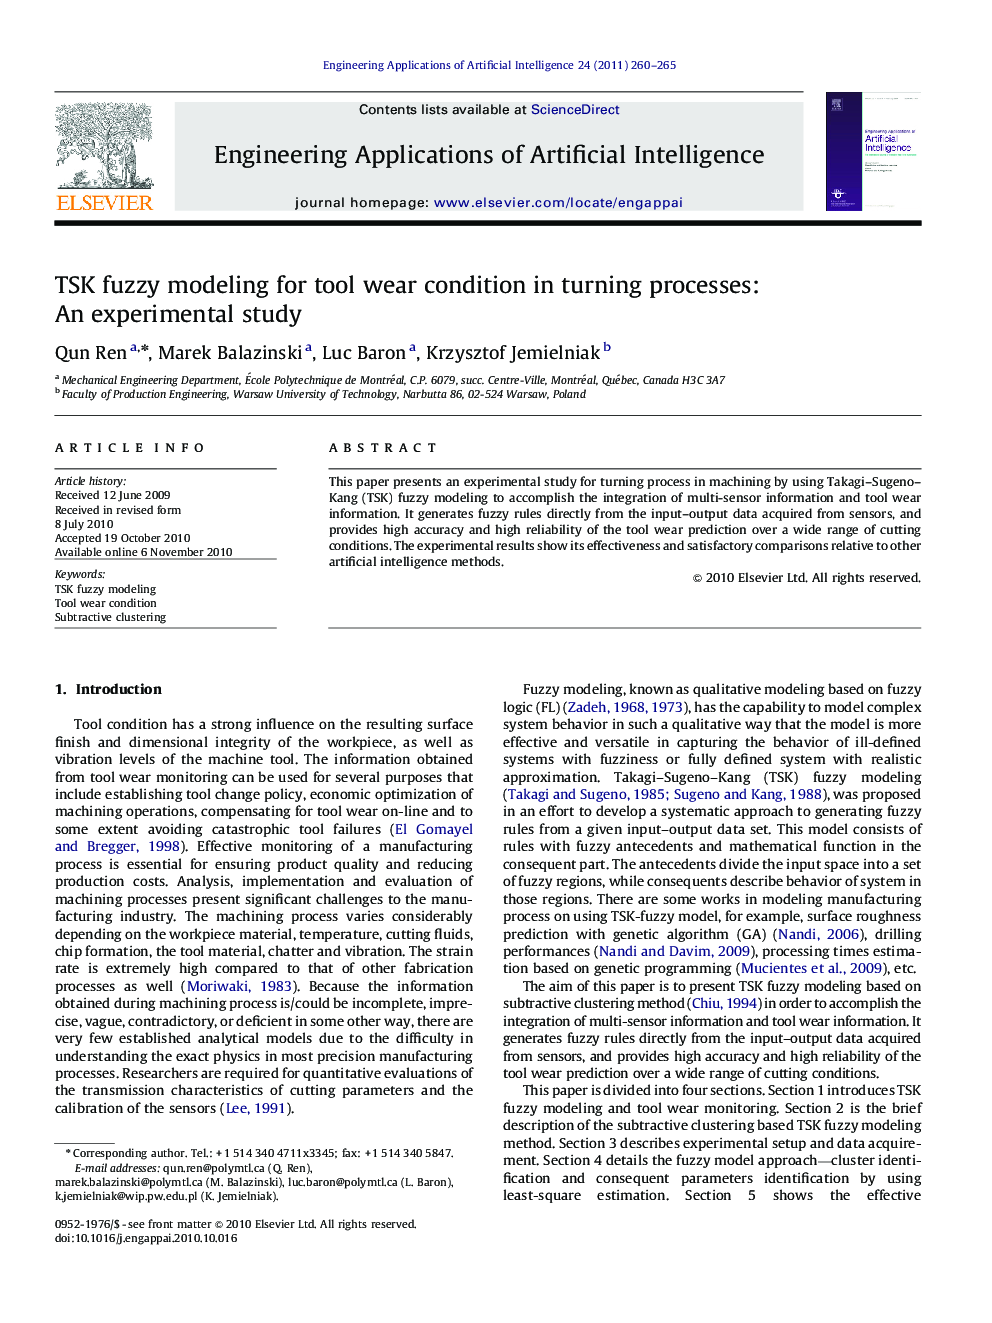 TSK fuzzy modeling for tool wear condition in turning processes: An experimental study